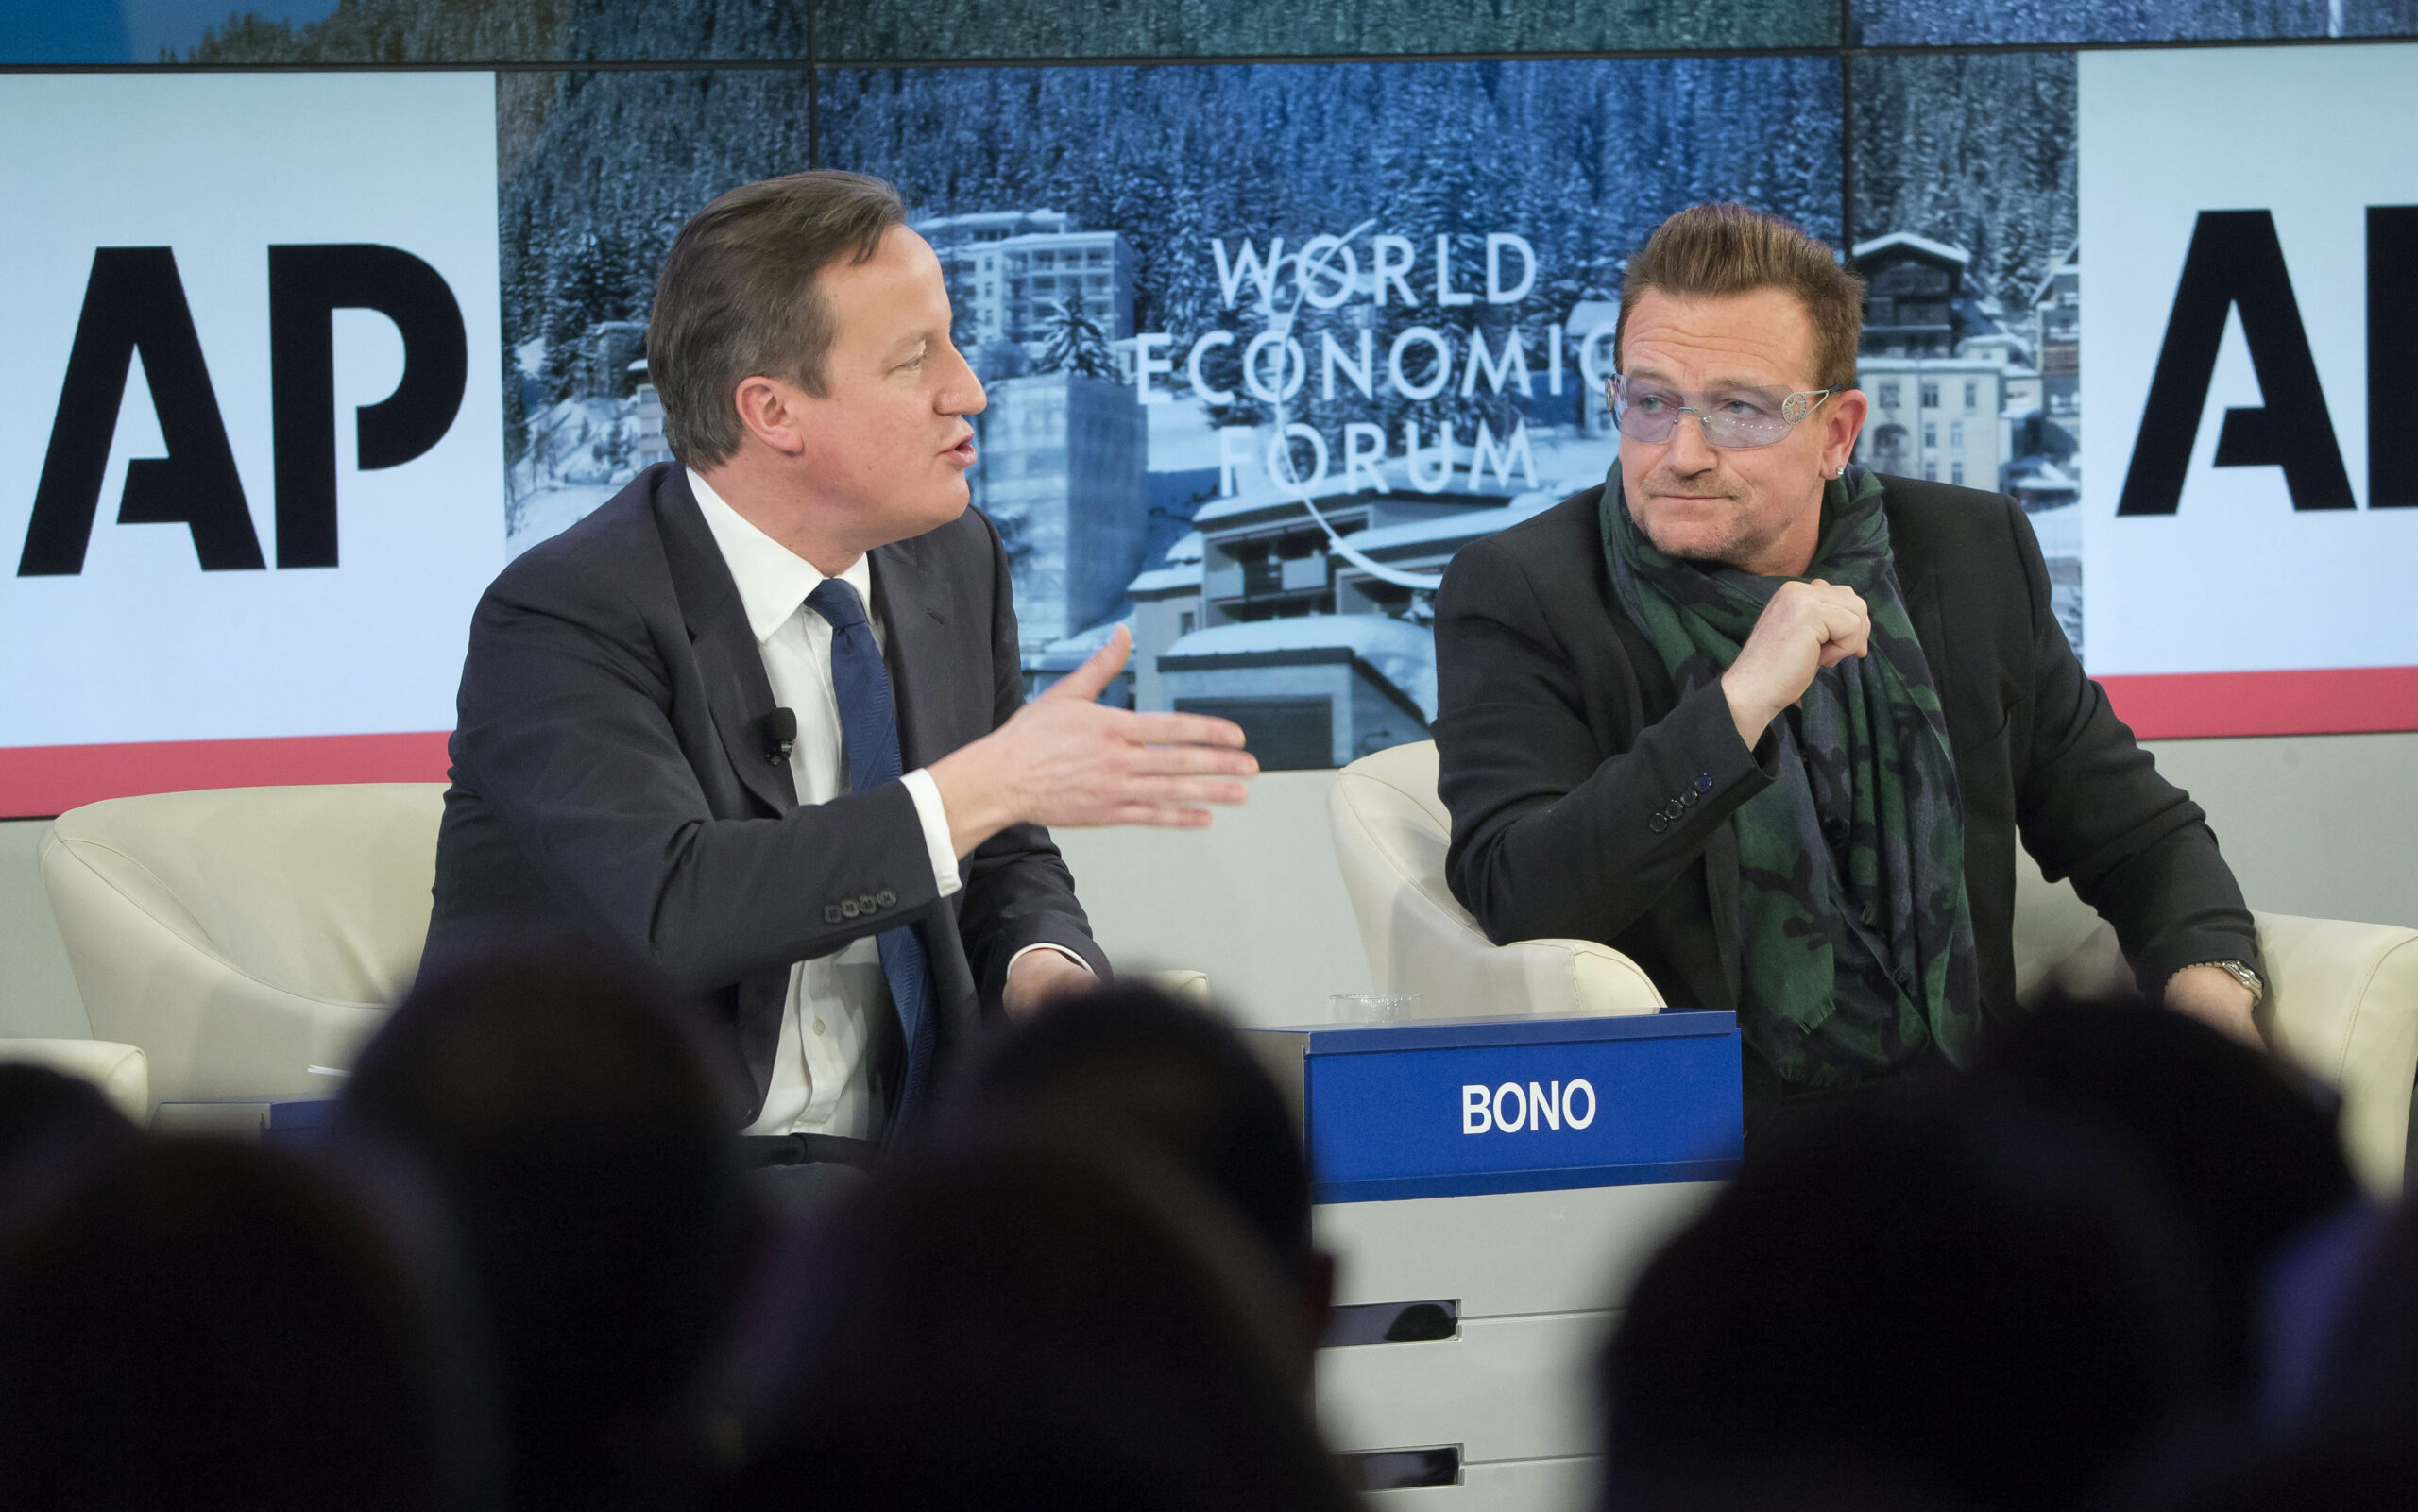 British Prime Minister David Cameron and rock star Bono speak during the panel discussion "The Post-2015 Goals: Inspiring a New Generation to Act," the fifth annual Associated Press debate, at the World Economic Forum in Davos, Switzerland, Friday, Jan. 24, 2014. (AP Photo/Michel Euler)